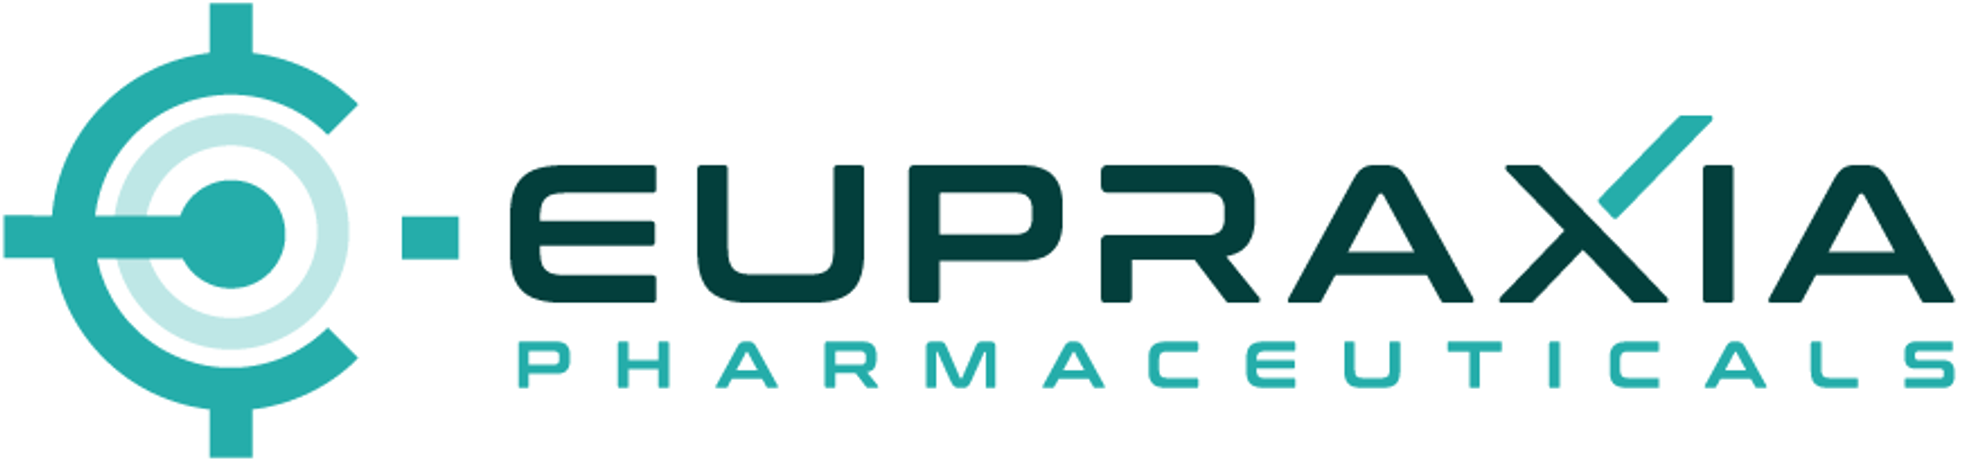 Eupraxia - Polymer Membrane Drug Delivery Technology